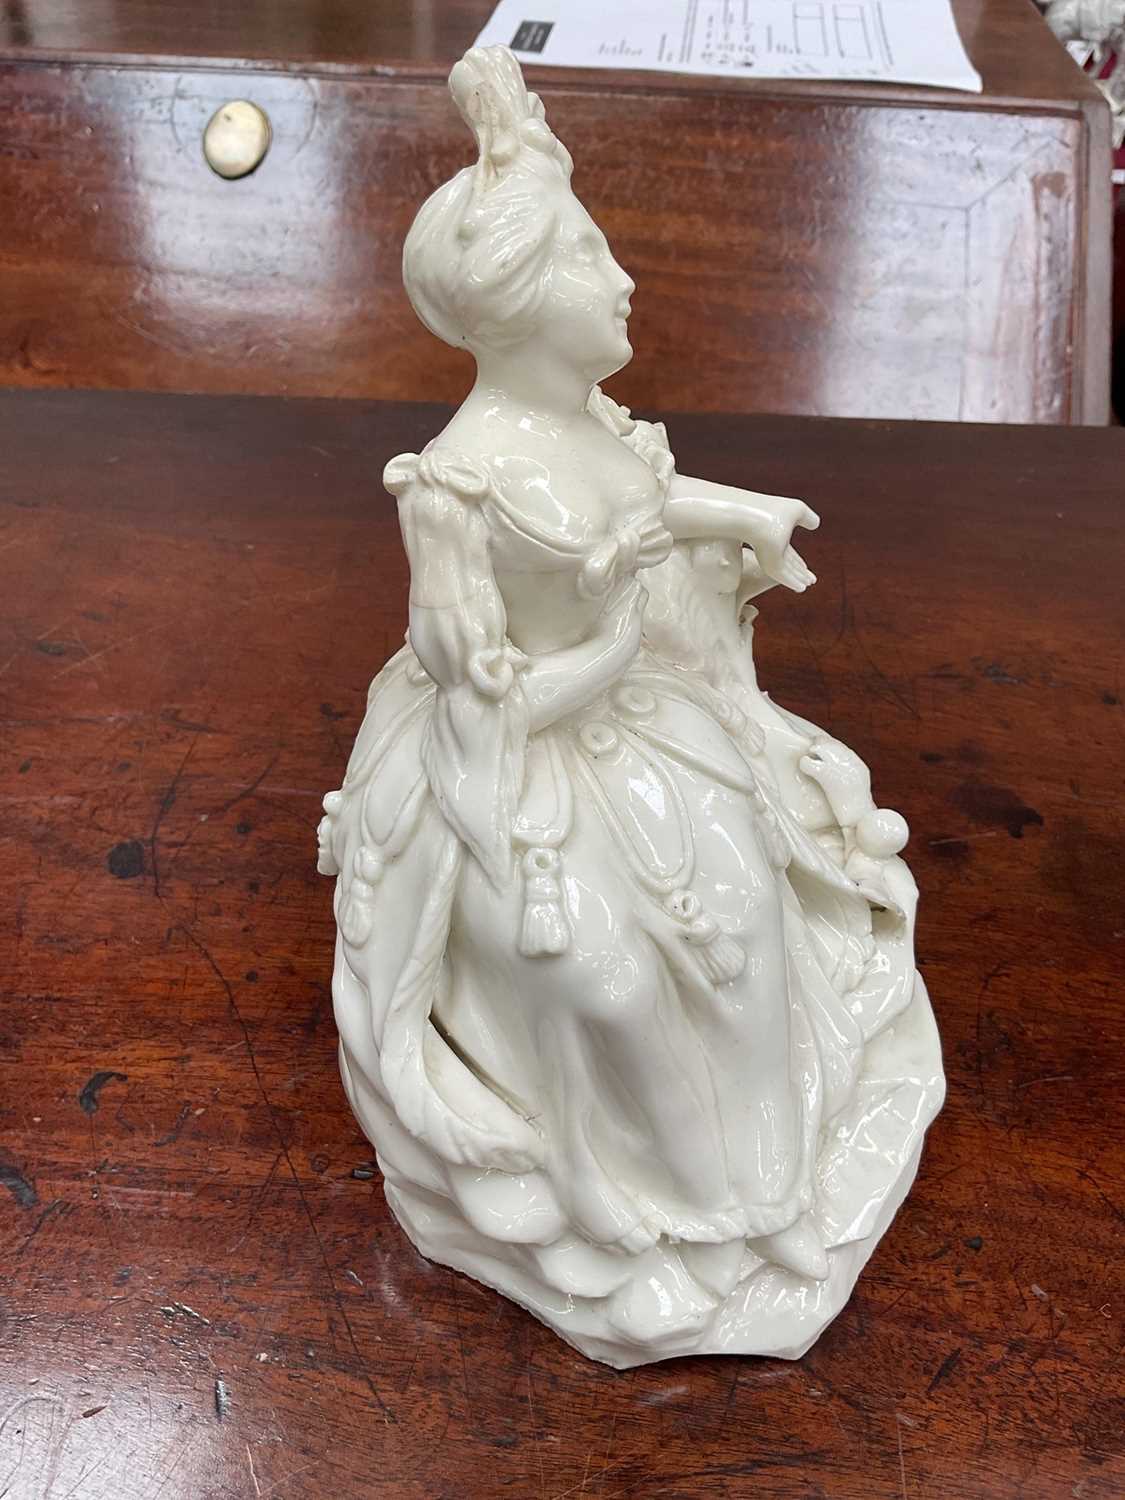 18th century porcelain figure of a seated lady - Image 4 of 6